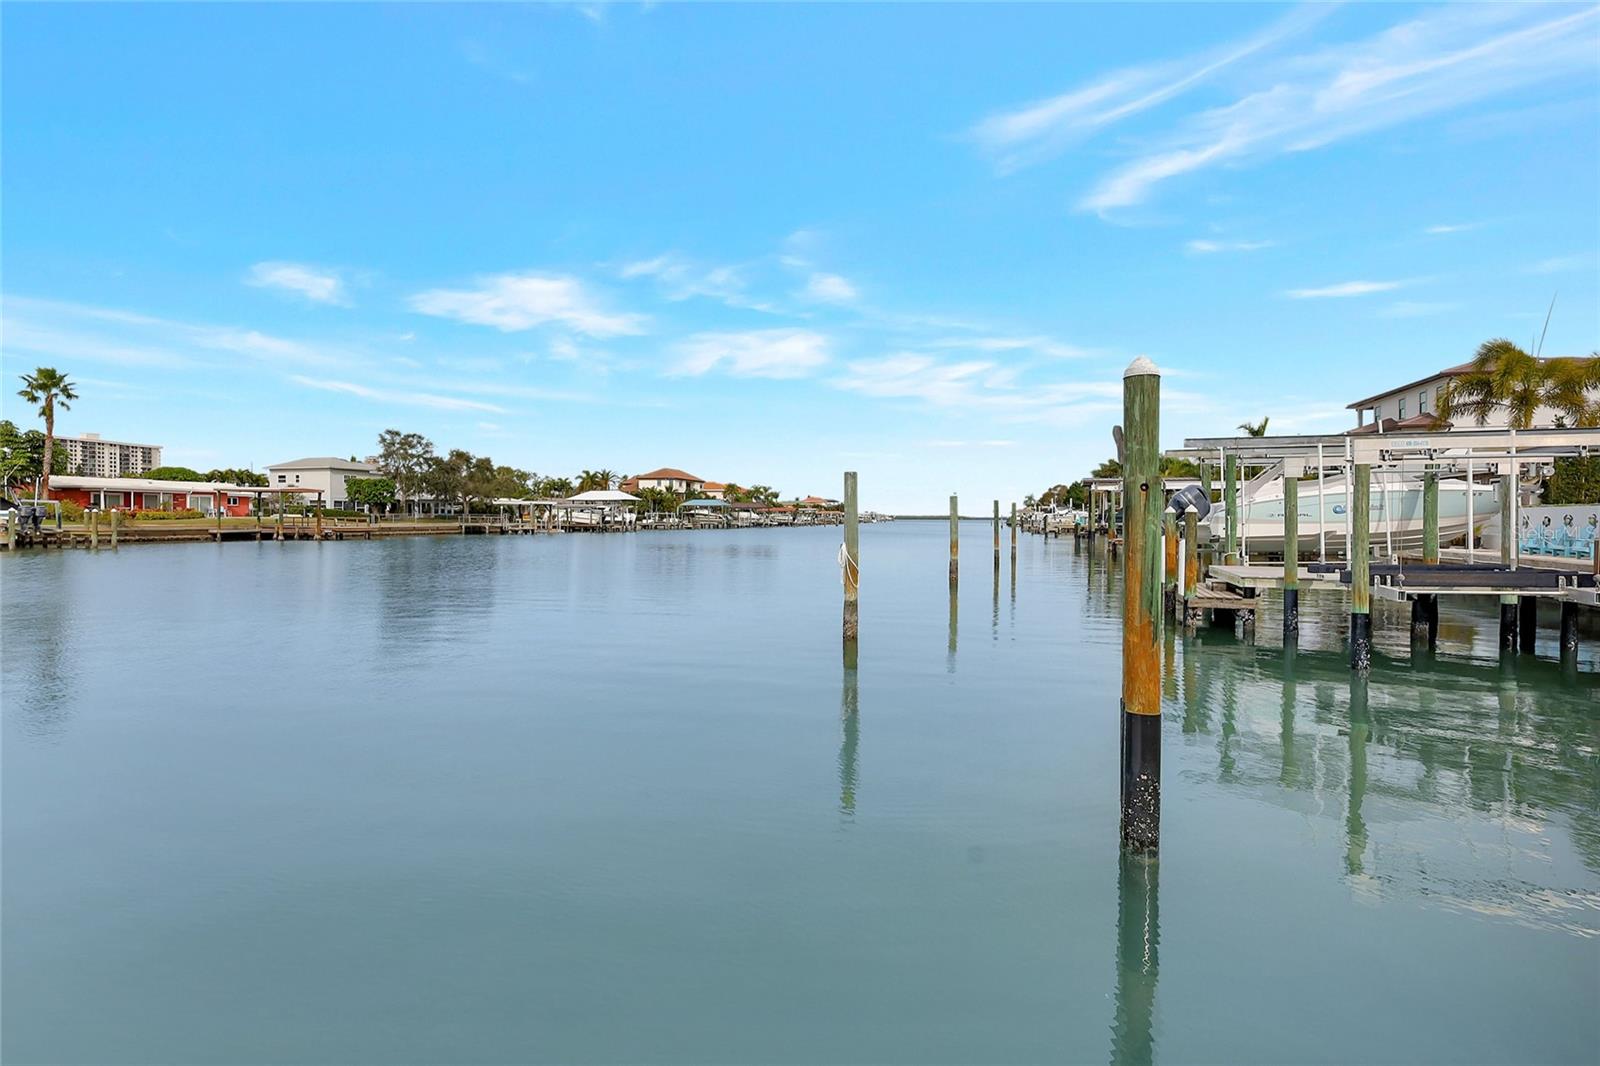 Perfect blend of outdoor luxury and captivating waterfront scenery.